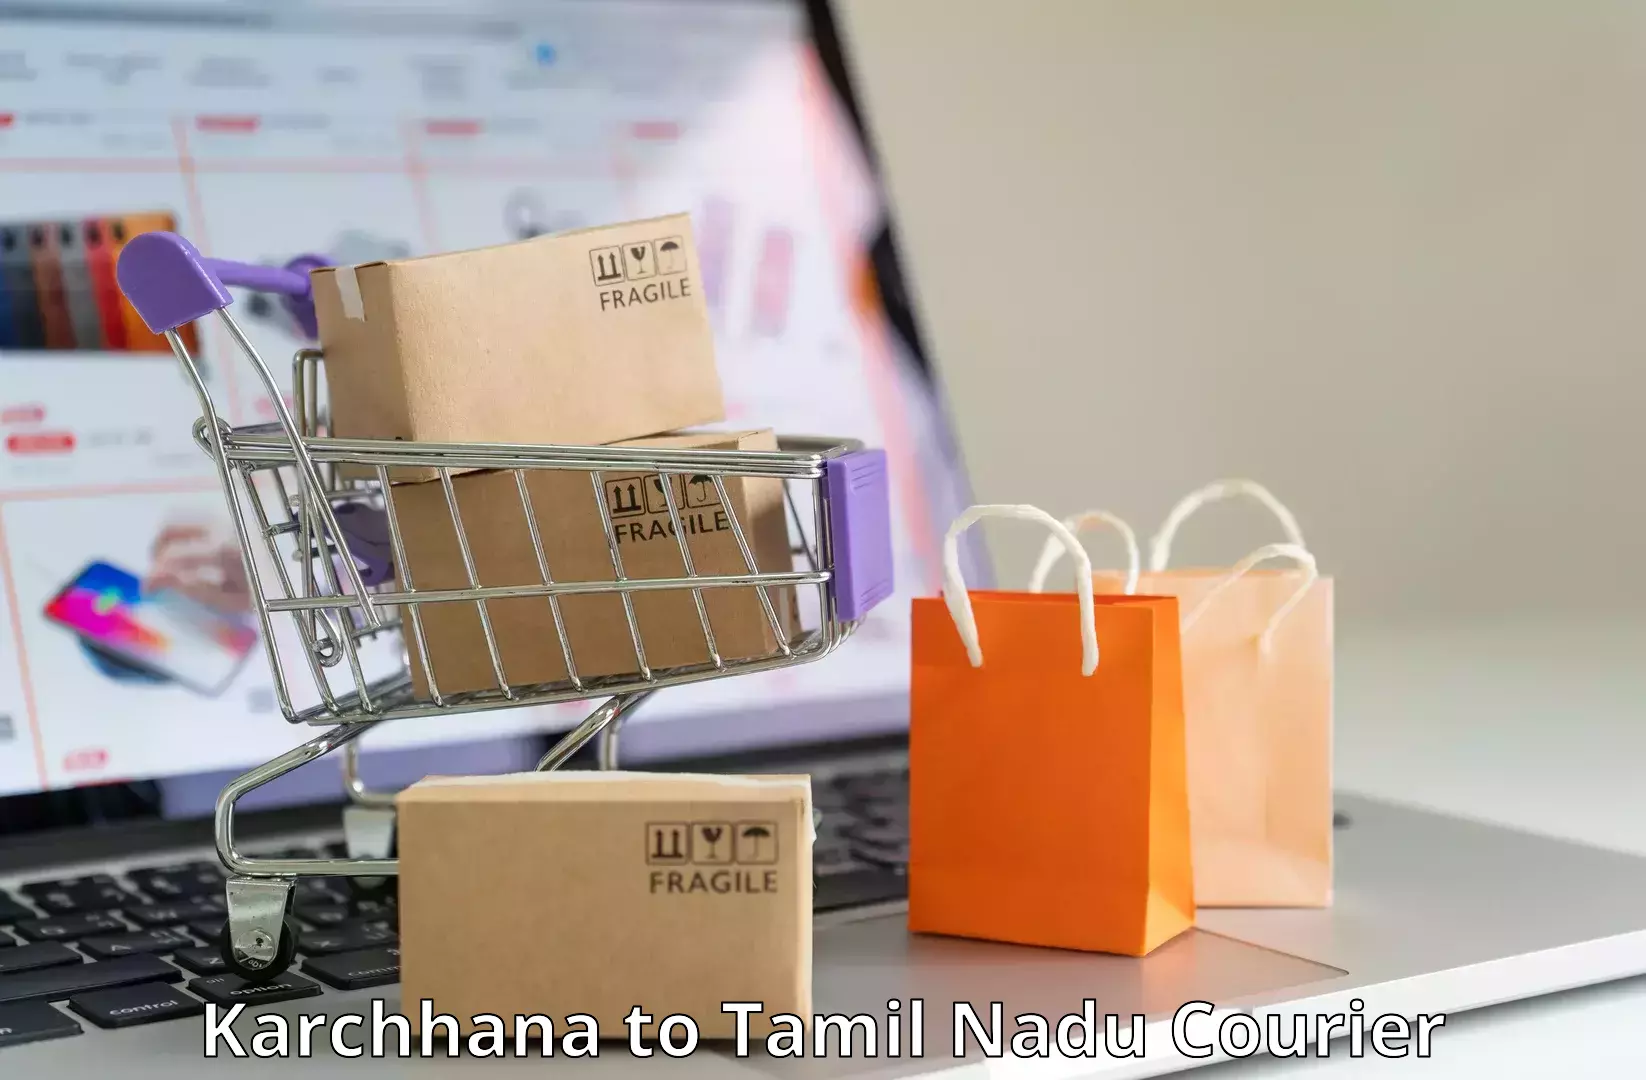 Personalized courier solutions Karchhana to Tiruvallur